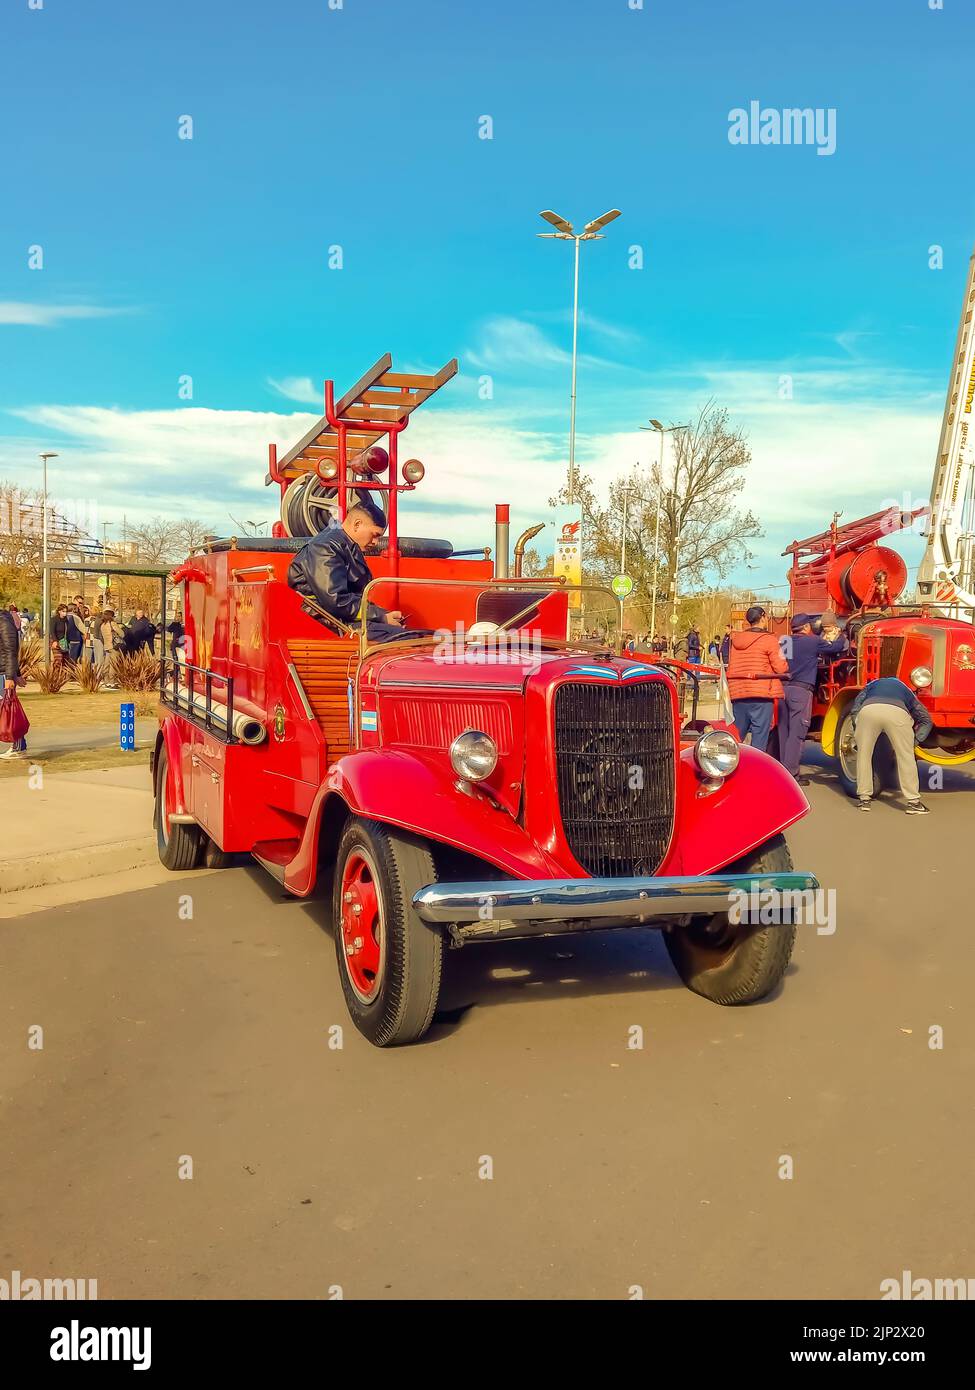 Avellaneda, Argentina - Jun 4, 2022: Old red 1936 Ford model 51 V8 fire truck pumper tanker. Front view. Grill. Ladder. Classic car show. Stock Photo